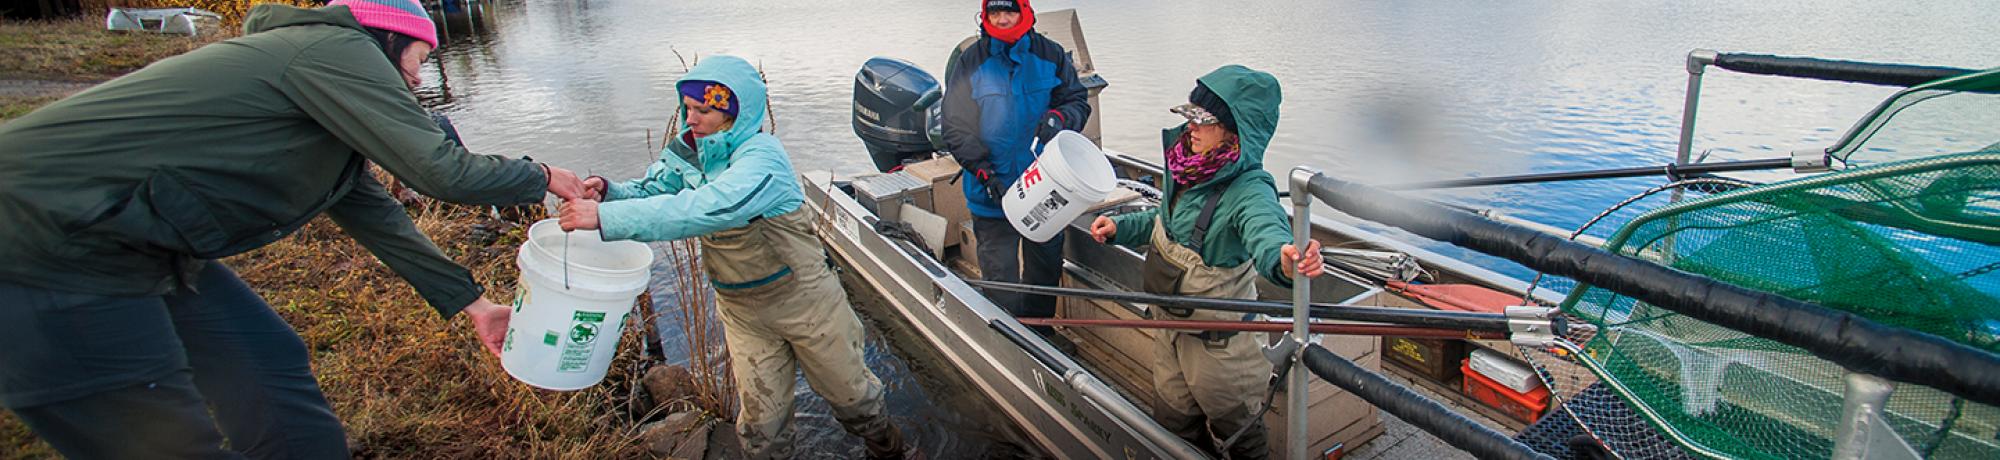 Faculty and students working together at the Fall River fish tagging event. (Photo by Val Atkinson)